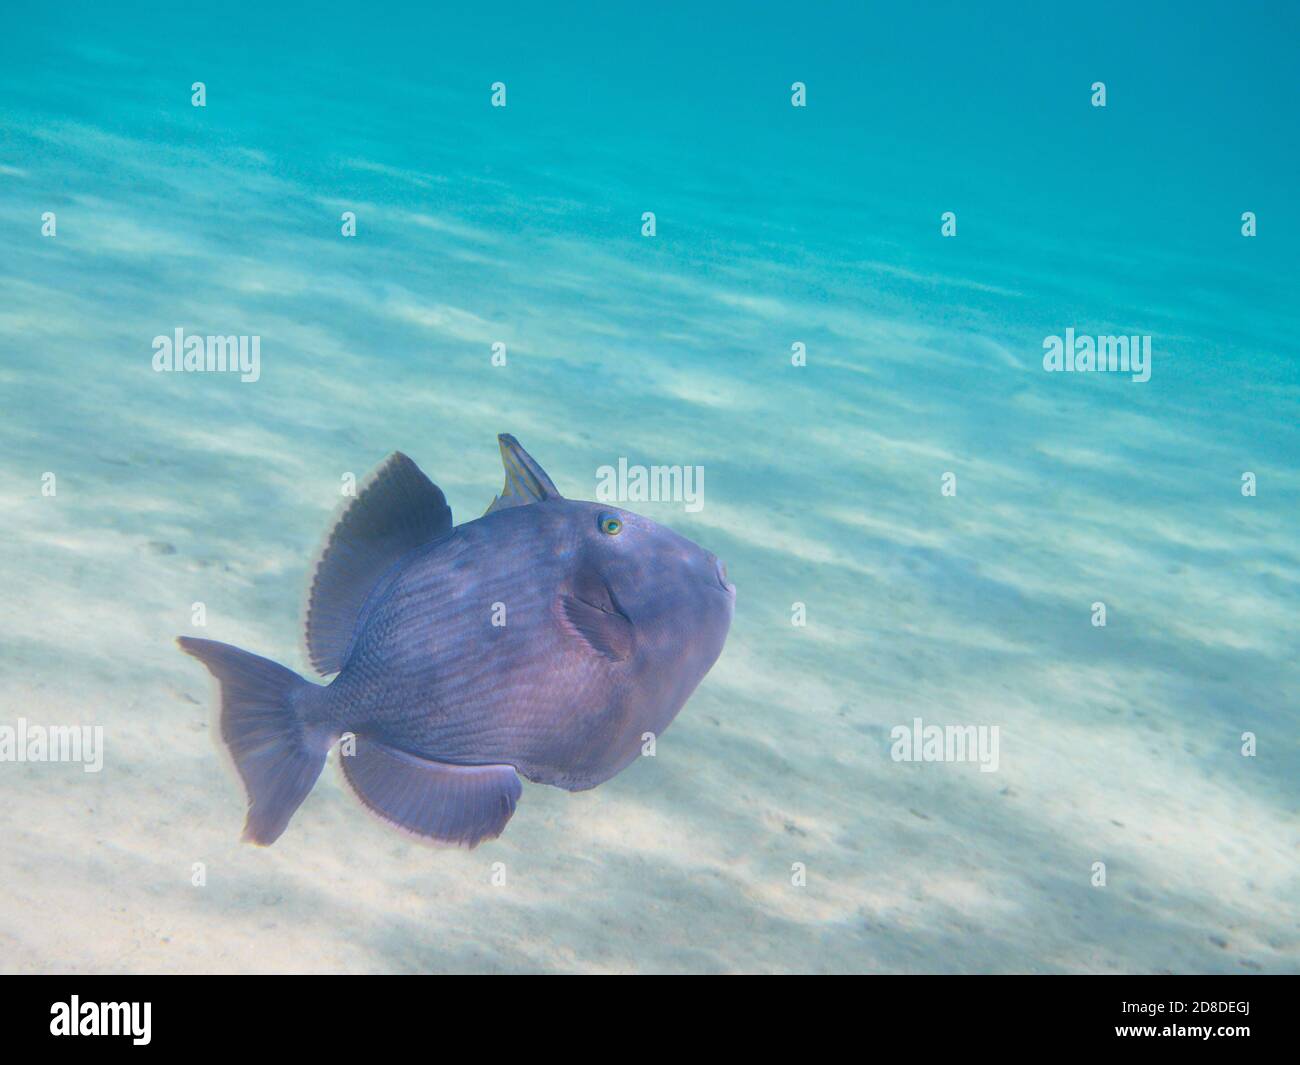 Blue triggerfish fish swimming over ocean sand bottom, underwater tropical paradise background, selective focus on eye, shallow depth of field Stock Photo